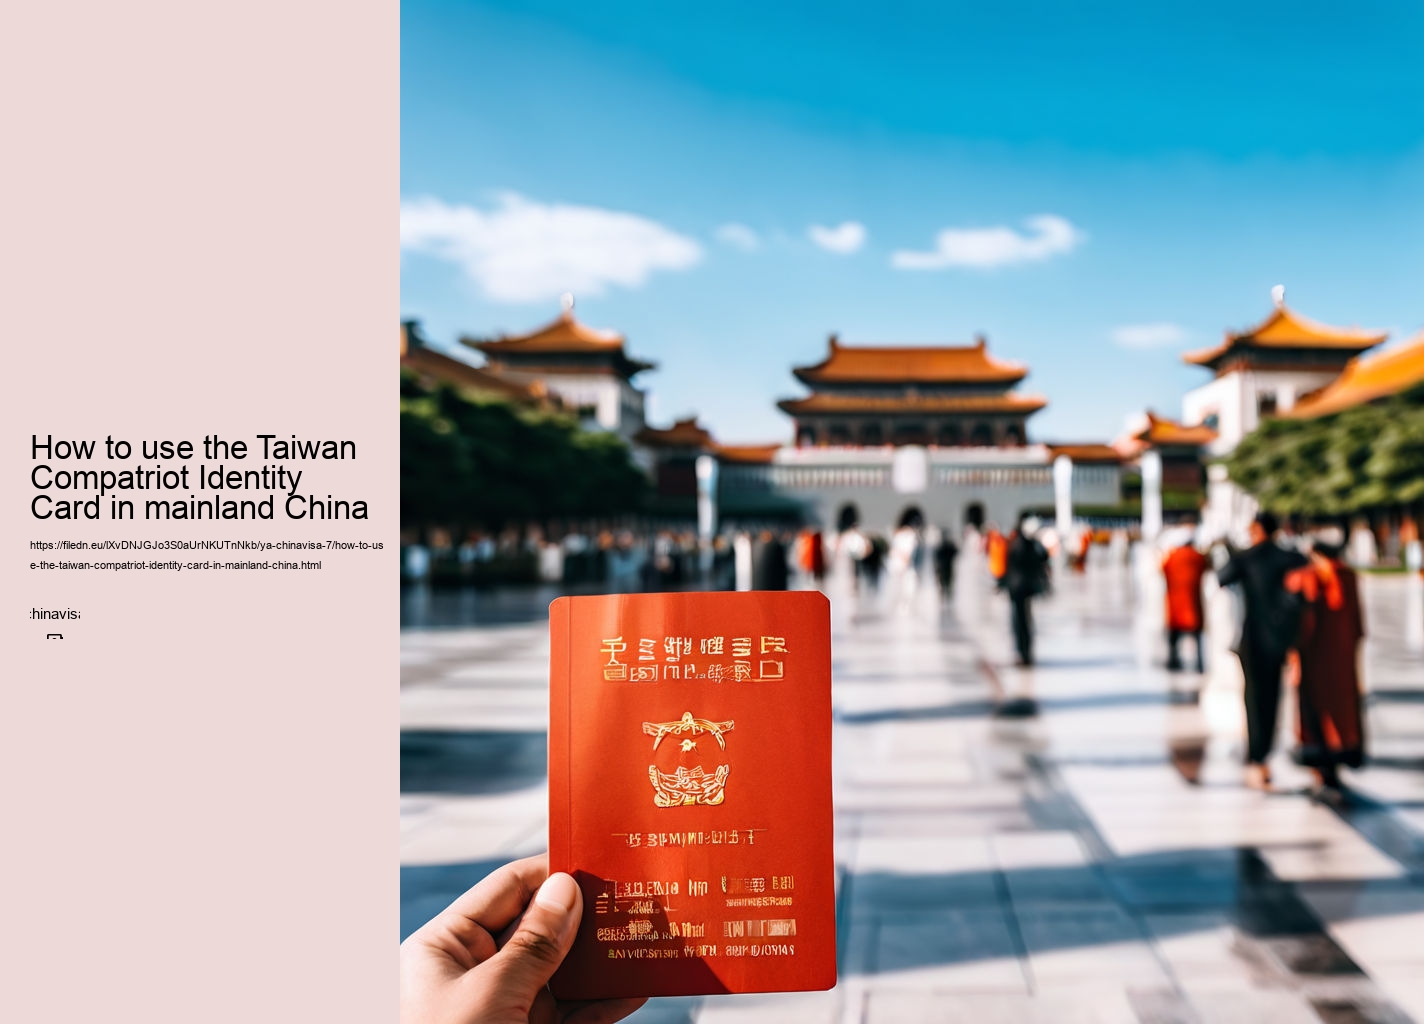 How to use the Taiwan Compatriot Identity Card in mainland China